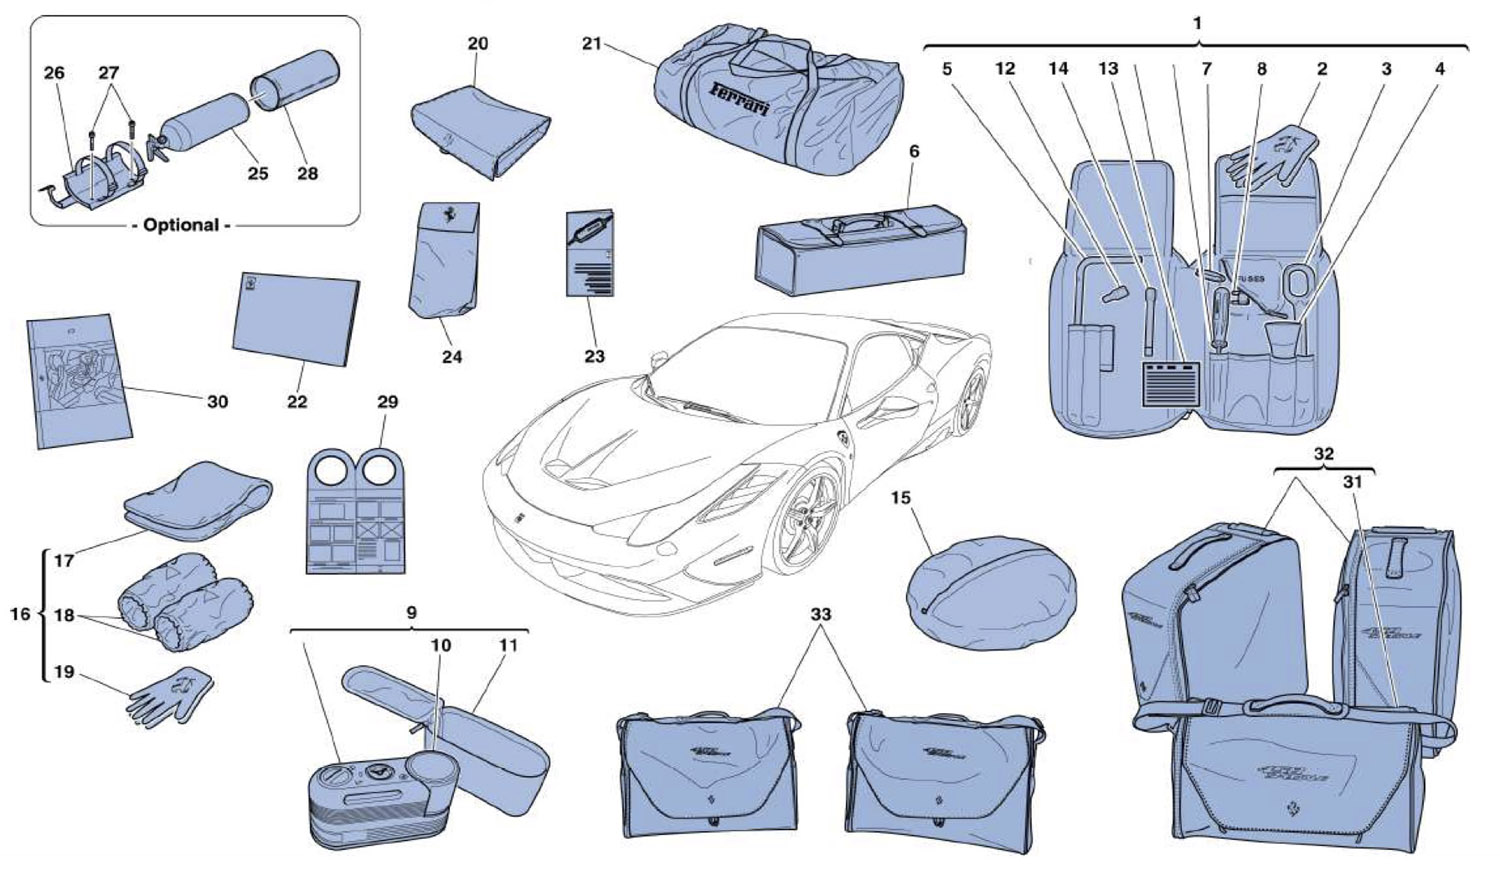 Schematic: Tool Kits And Accessories